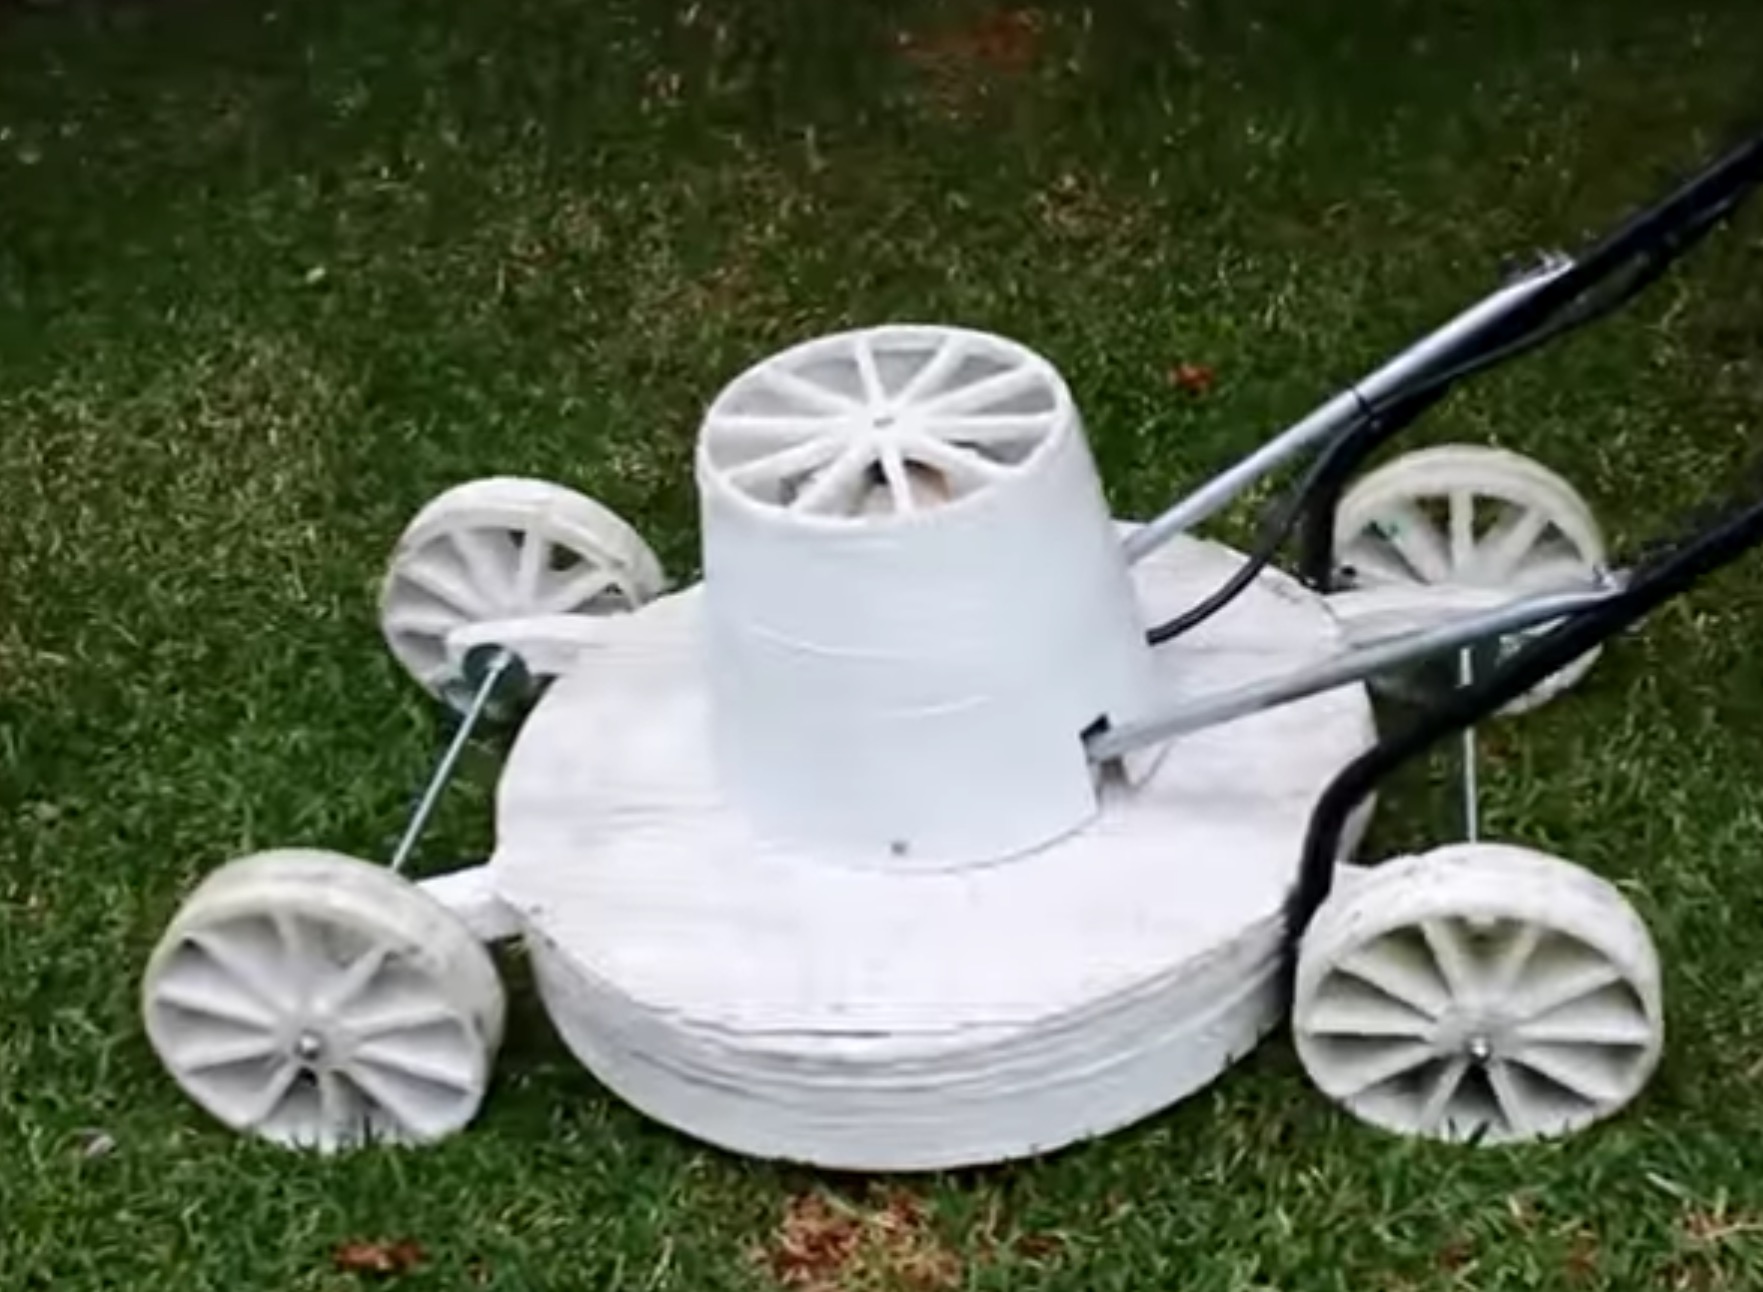  A functioning lawnmower produced on the Cheetah 2 large format 3D printer 